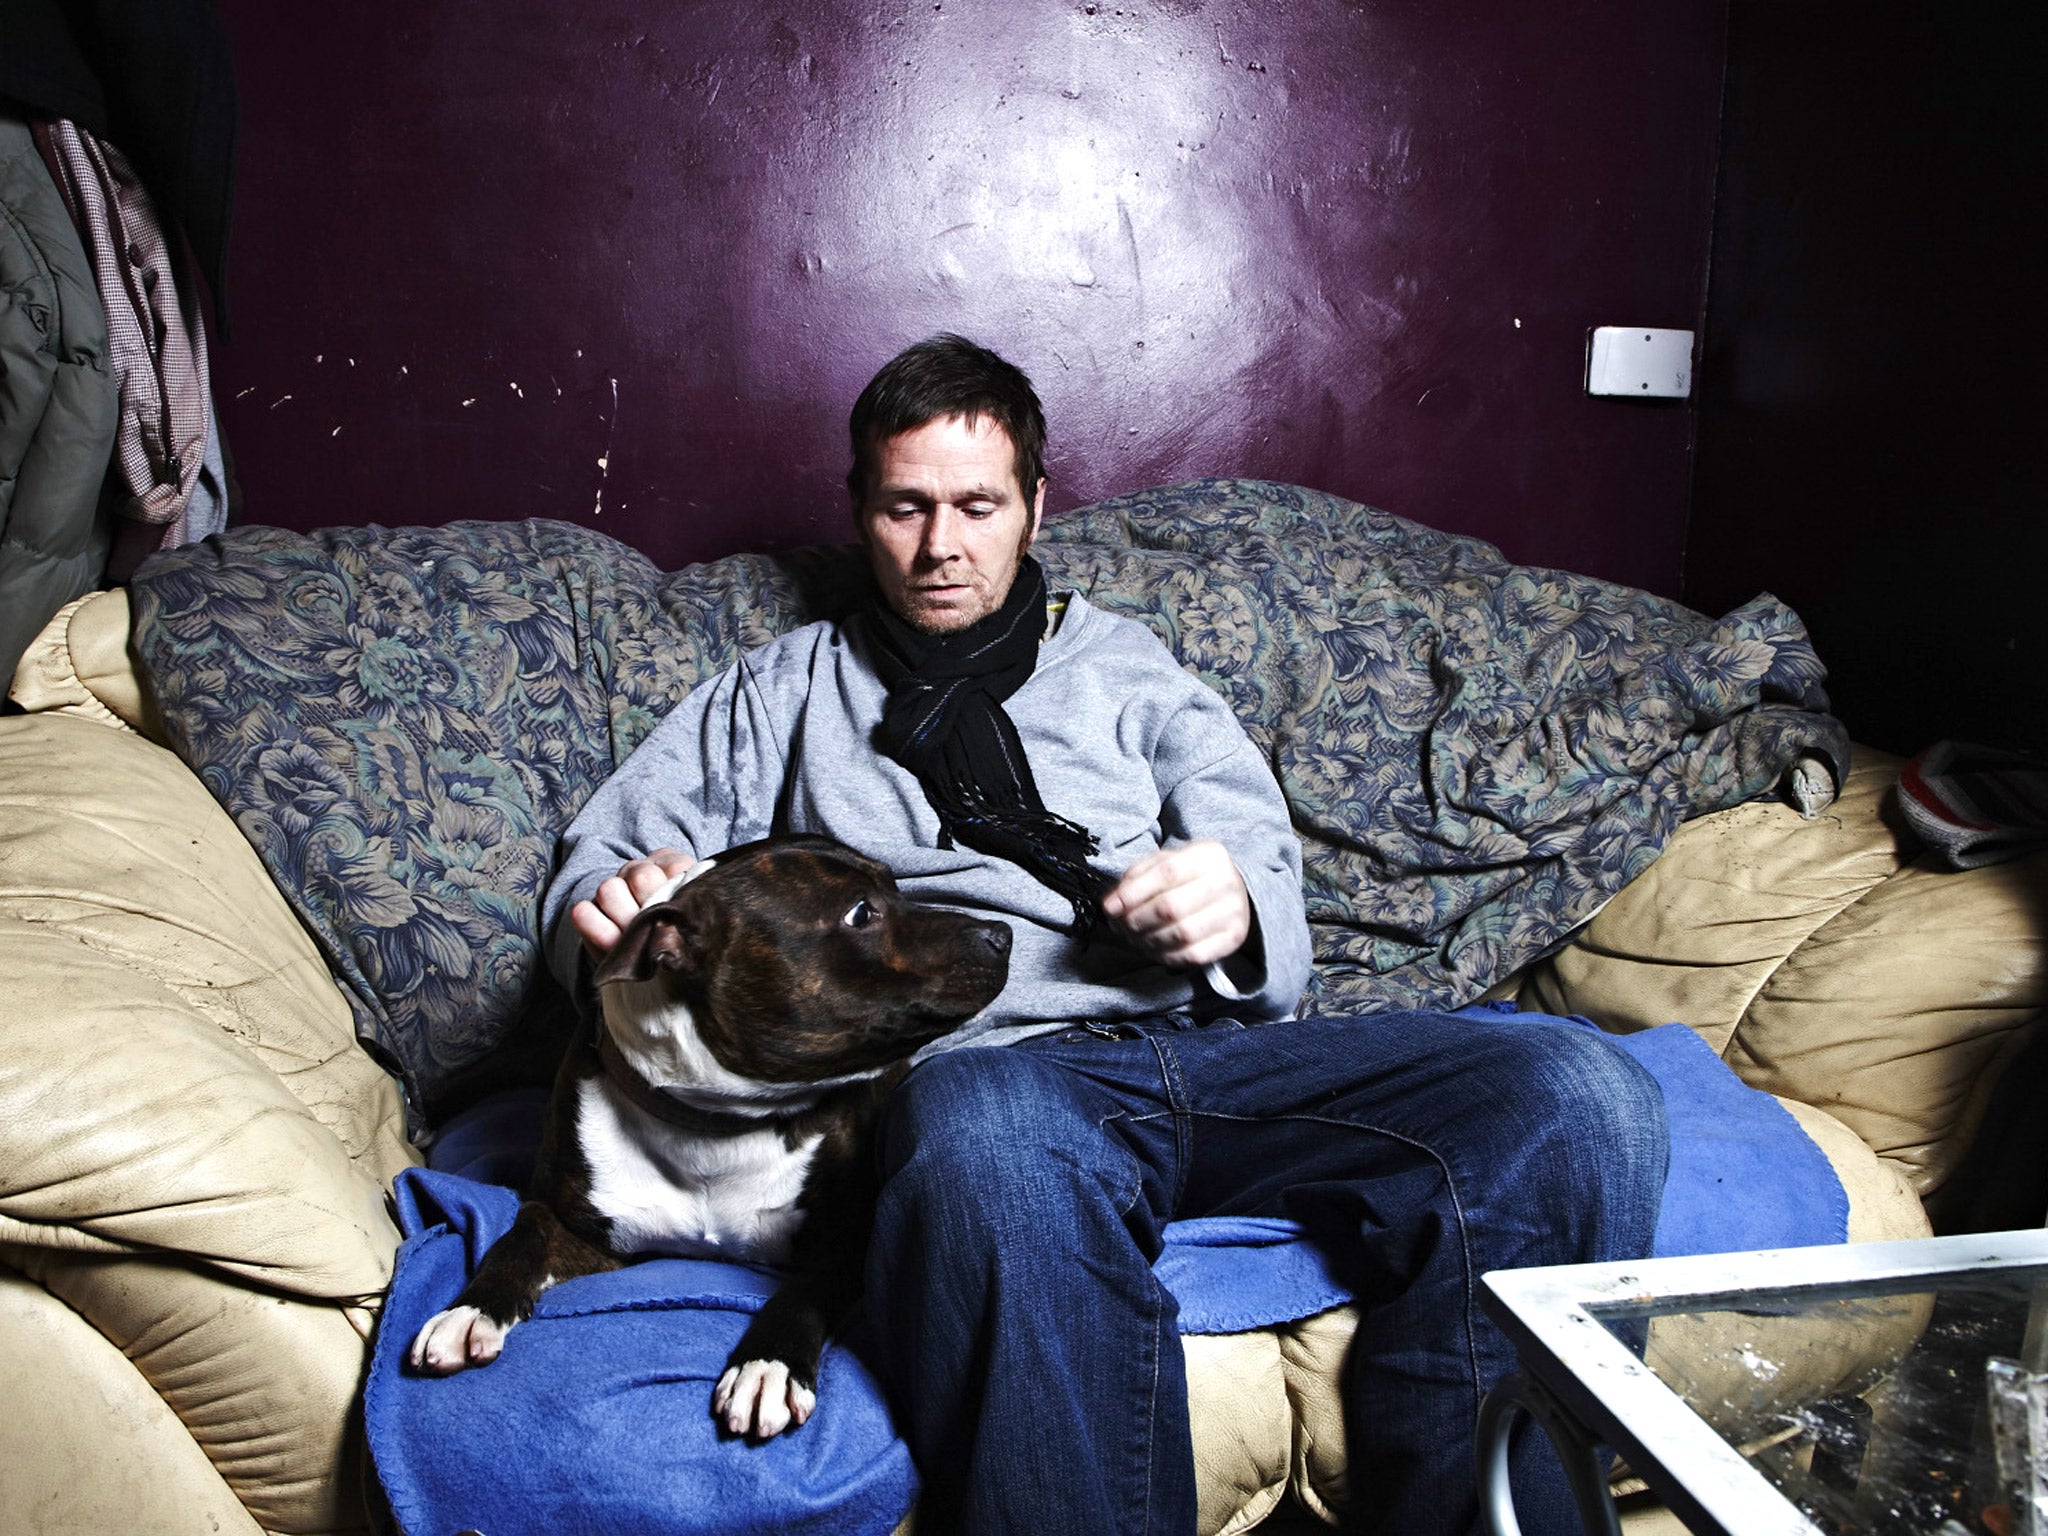 Fungi and his dog in Channel 4's 'Benefits Street'